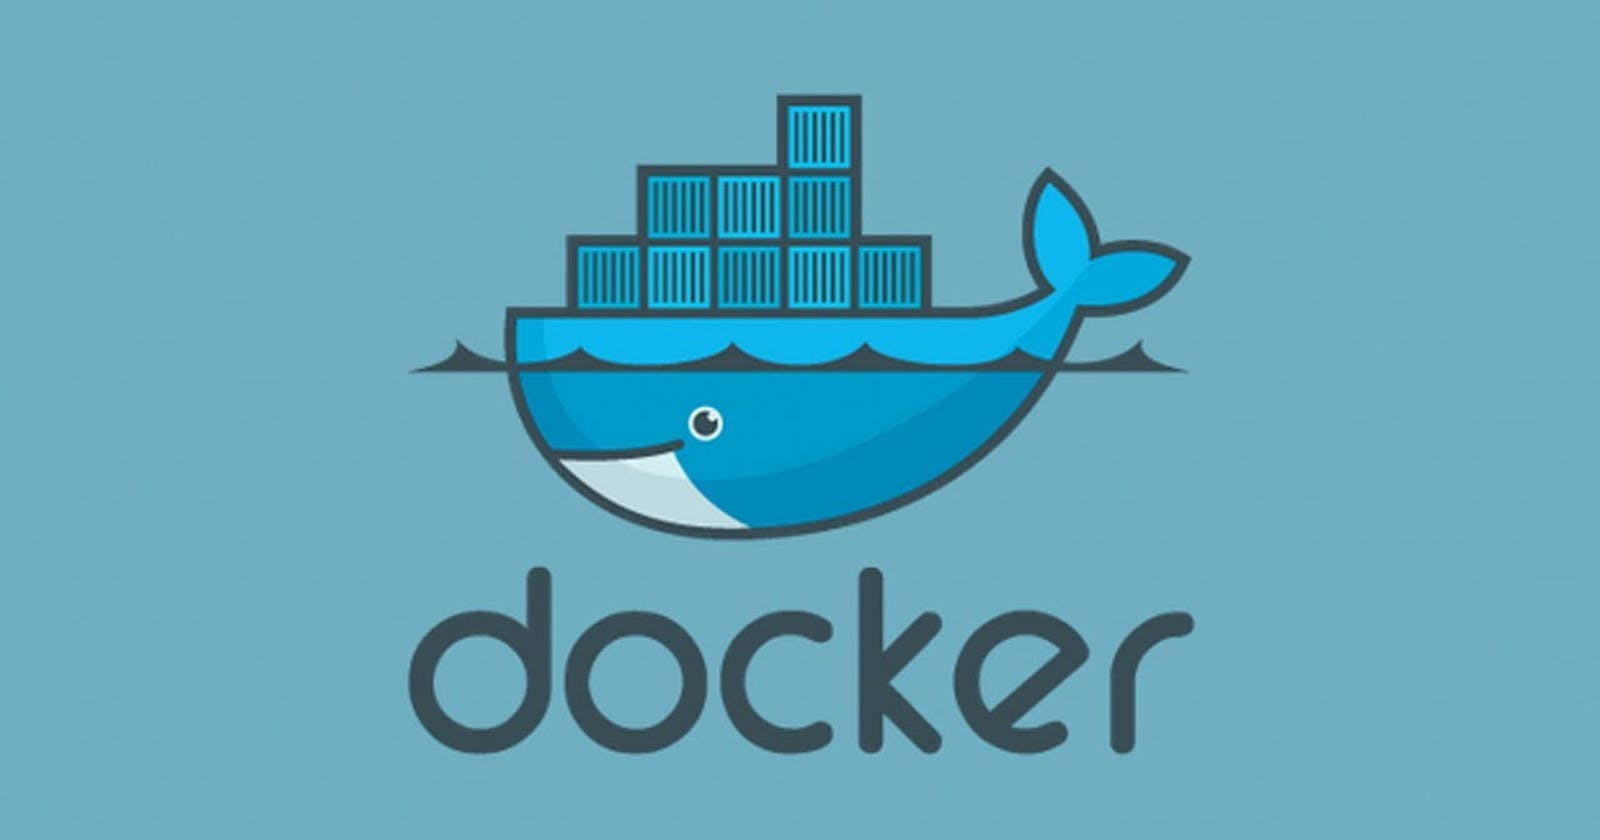 All About Dockerfiles